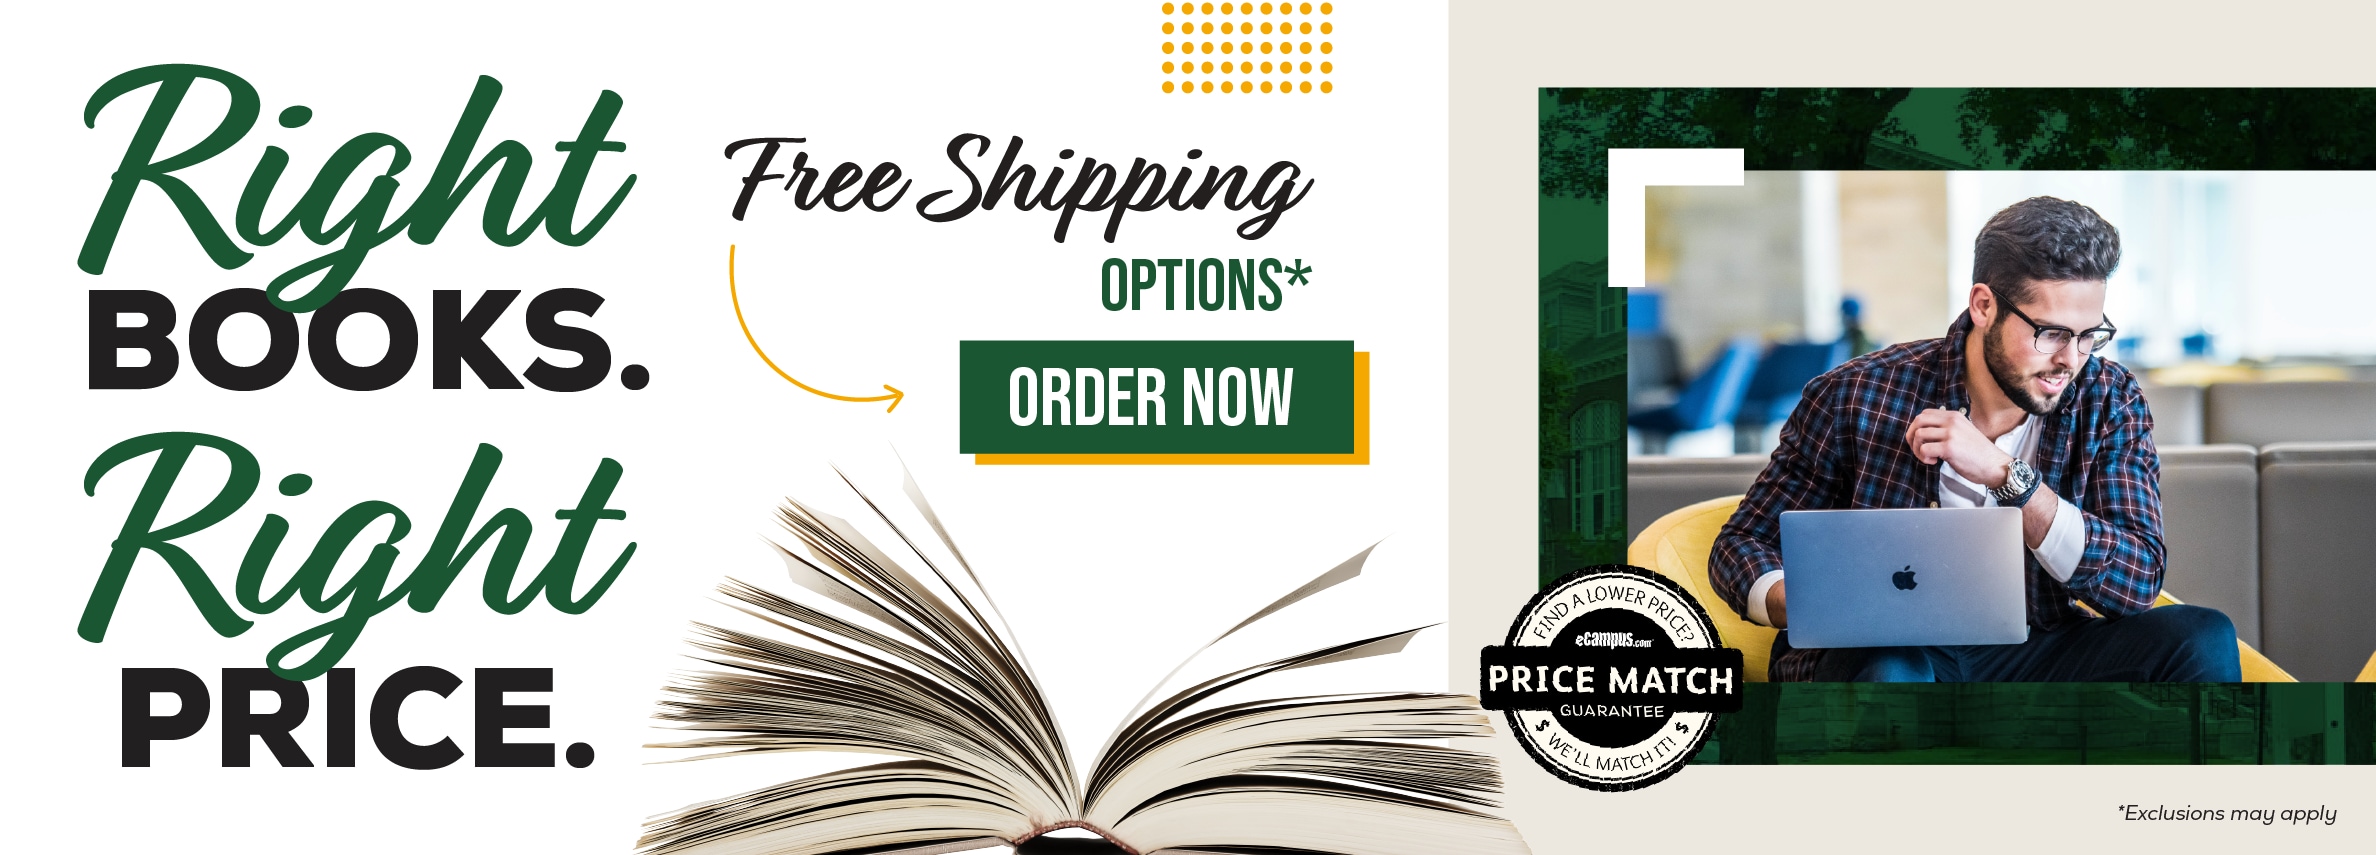 Right books. Right price. Free shipping options.* Order now. Price Match Guarantee. *Exclusions may apply.